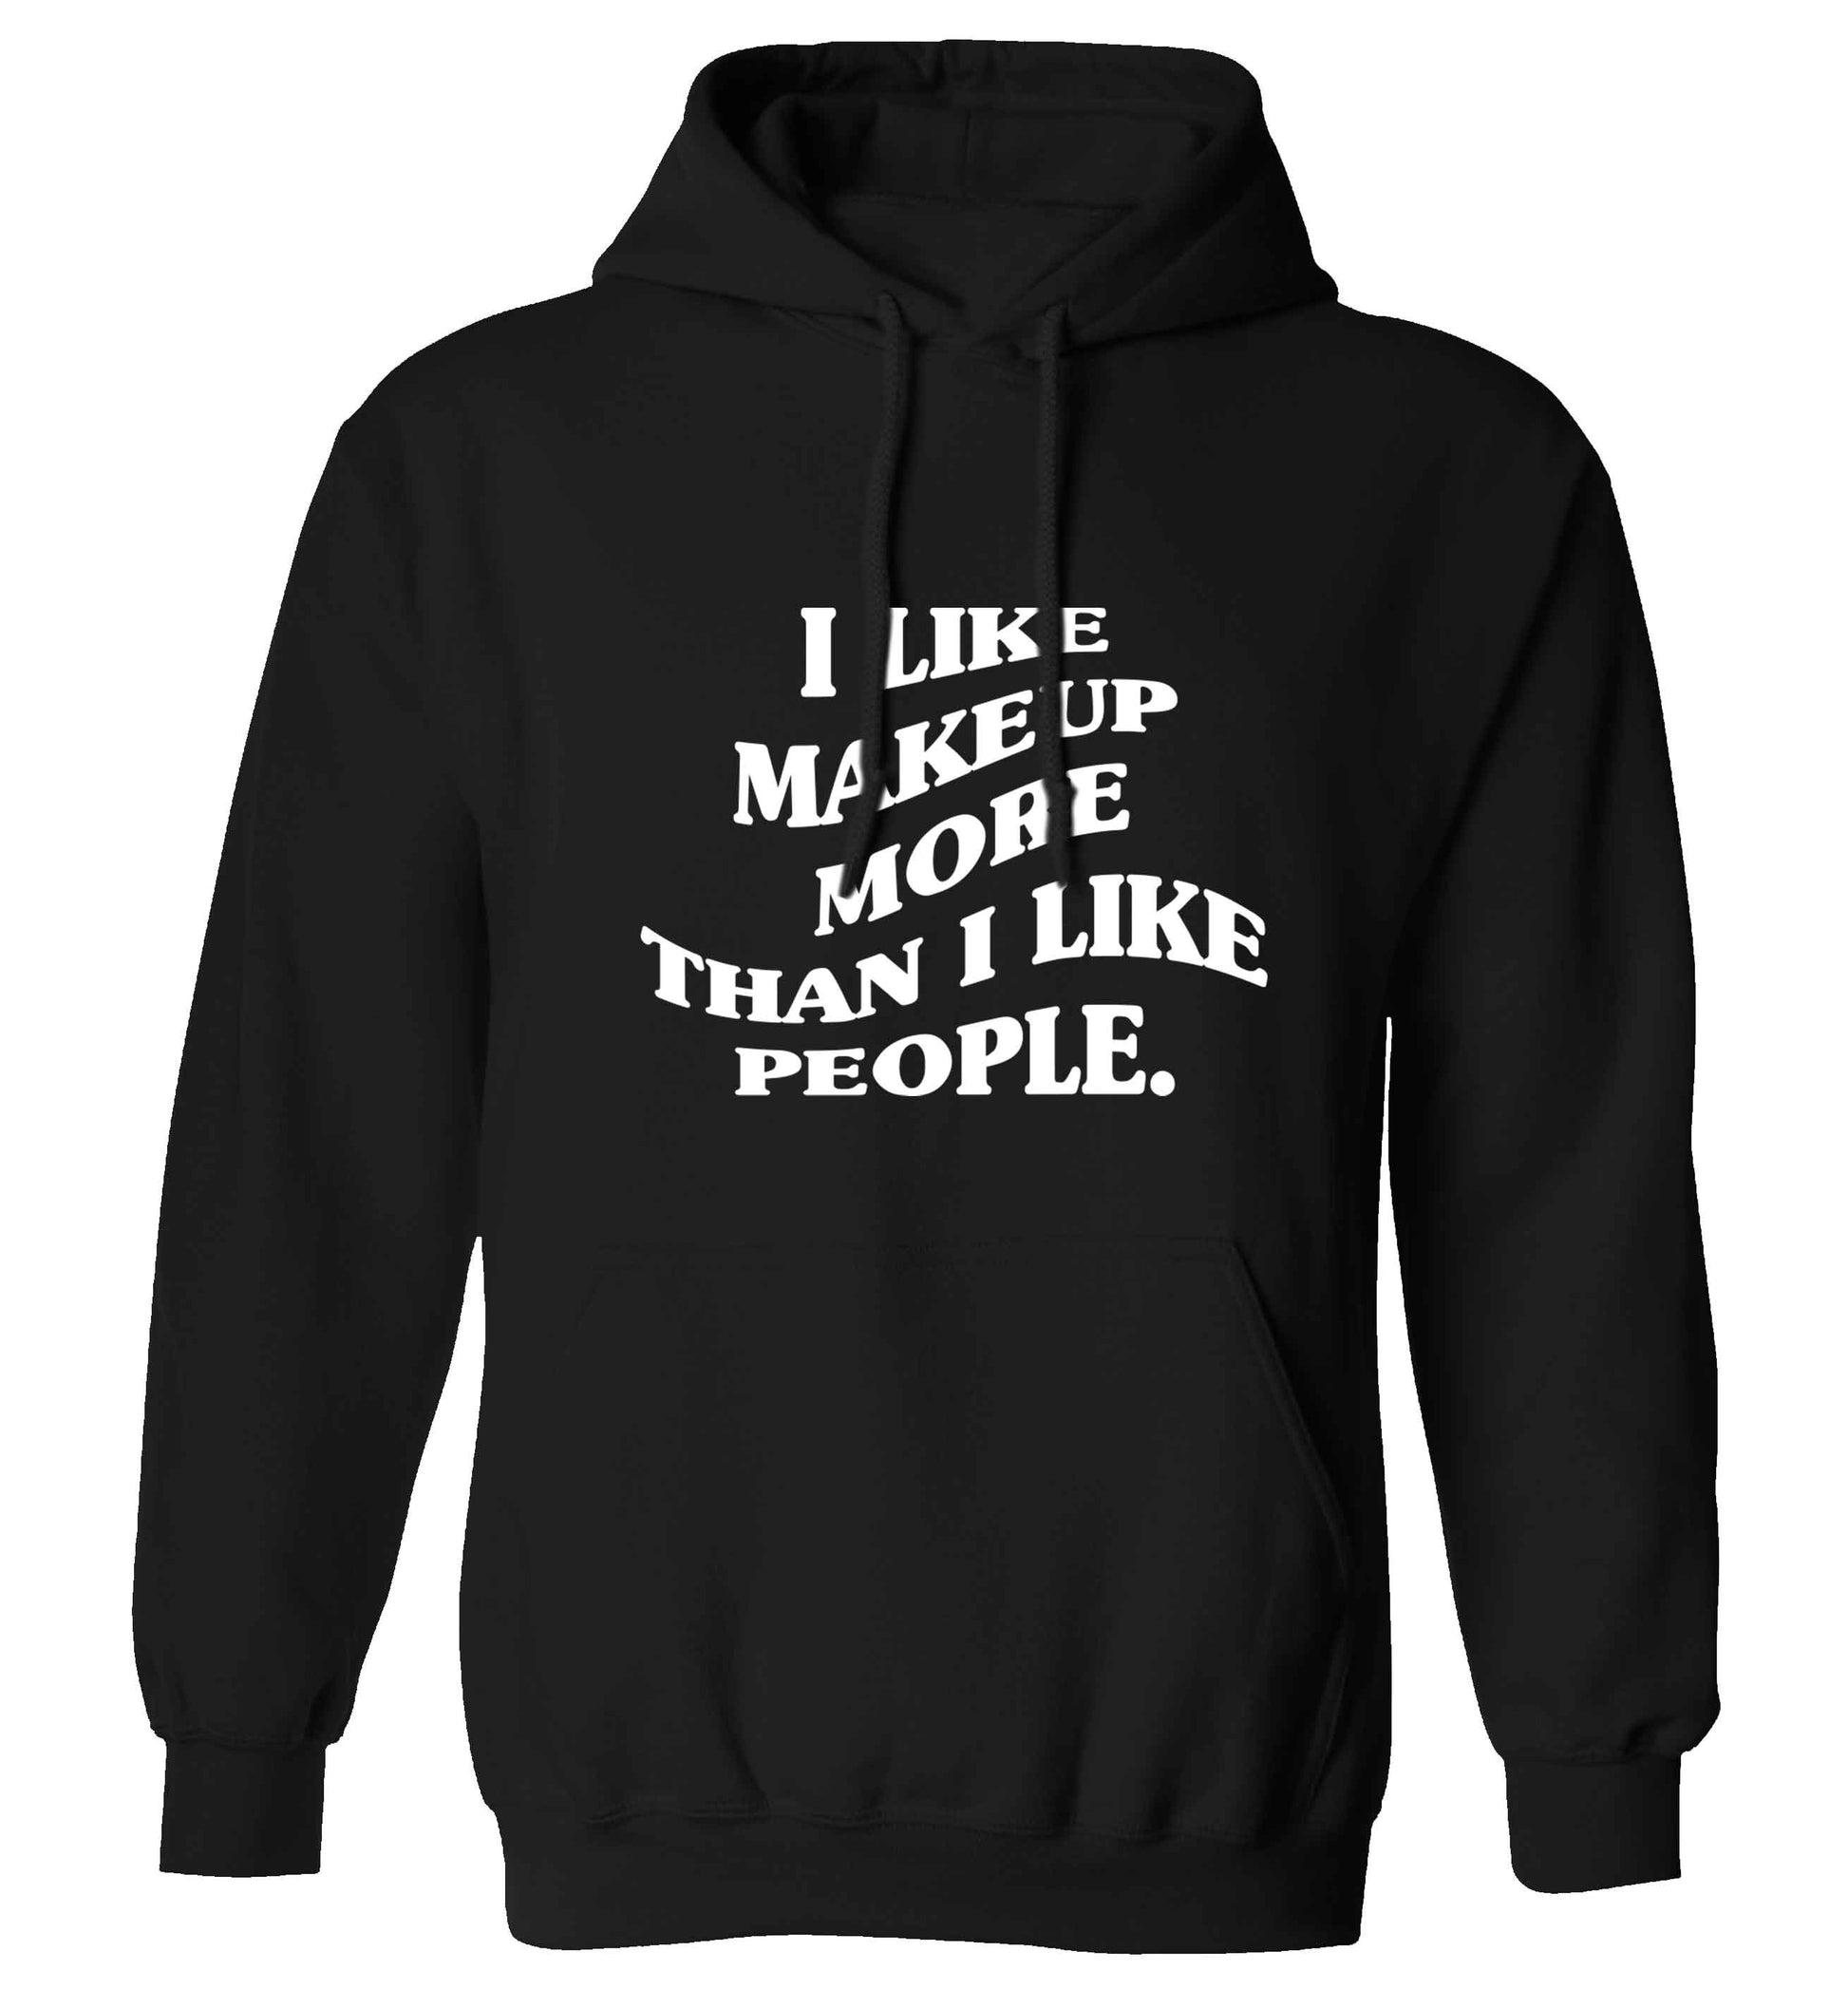 I like makeup more than people adults unisex black hoodie 2XL